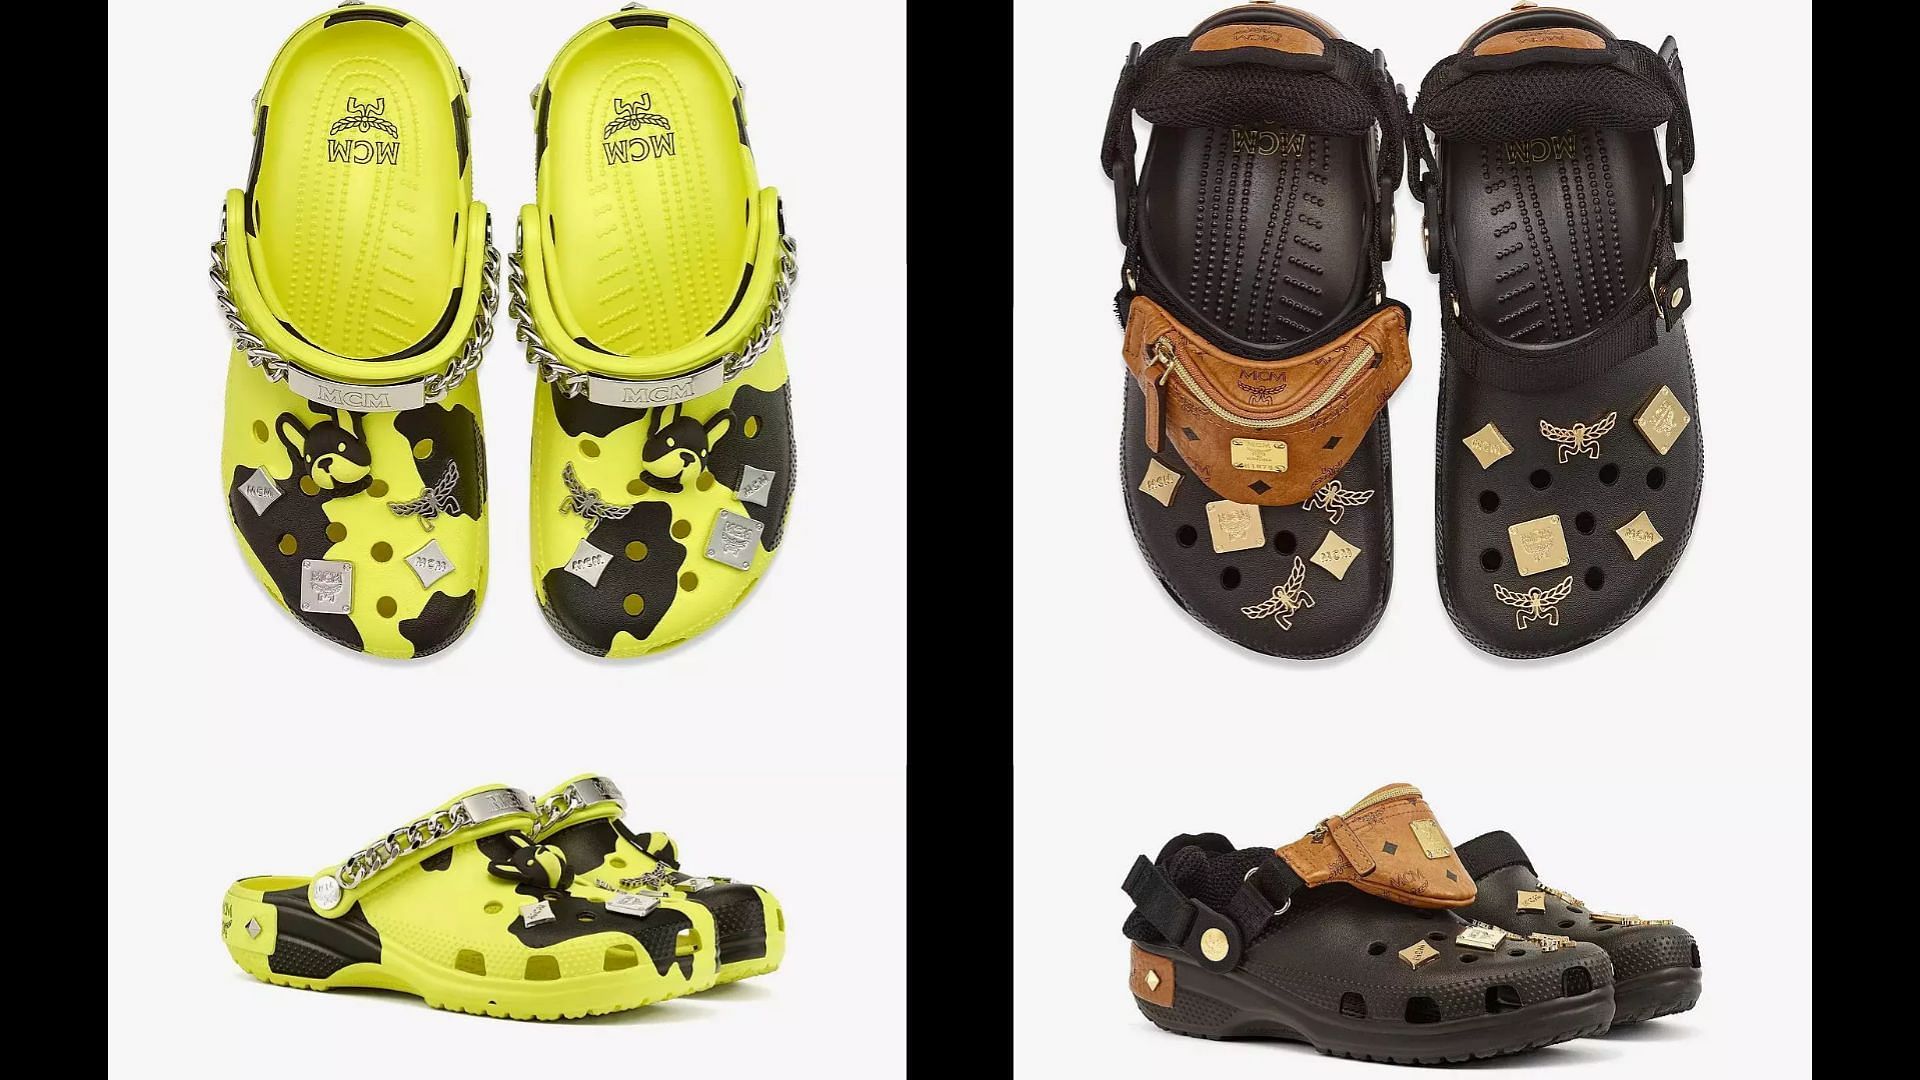 Where to buy the MCM X Crocs collection? Price, release date, and more